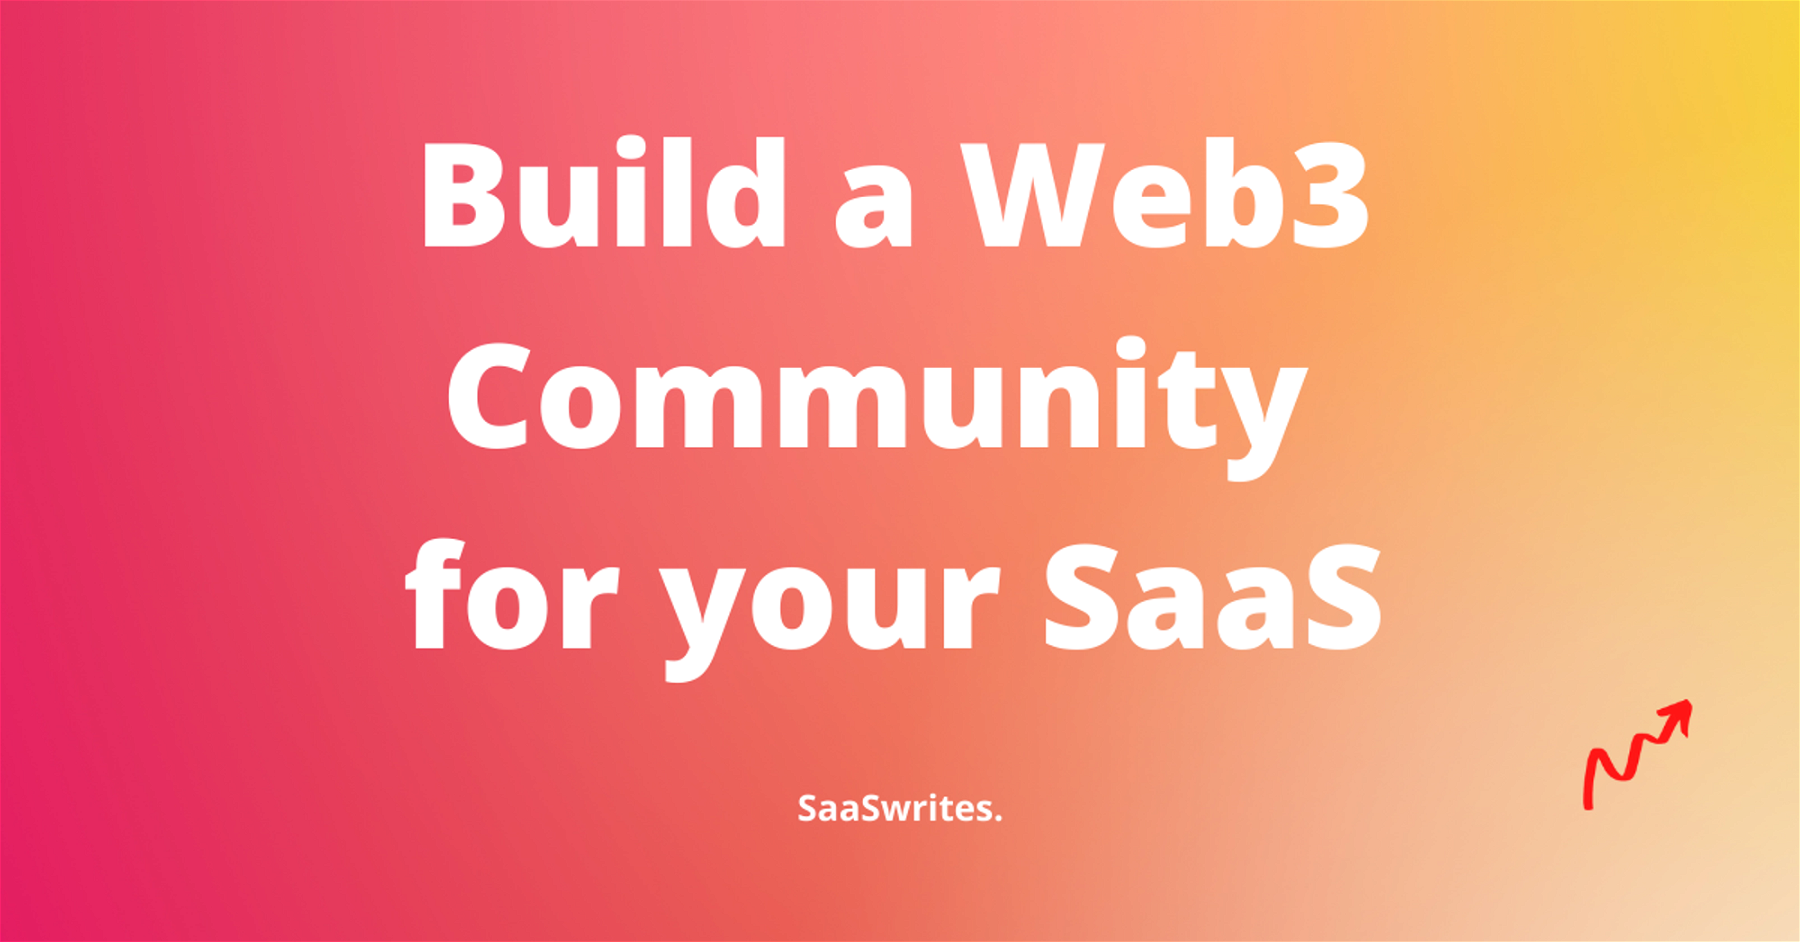 How to build a Web3 Community for your SaaS? 